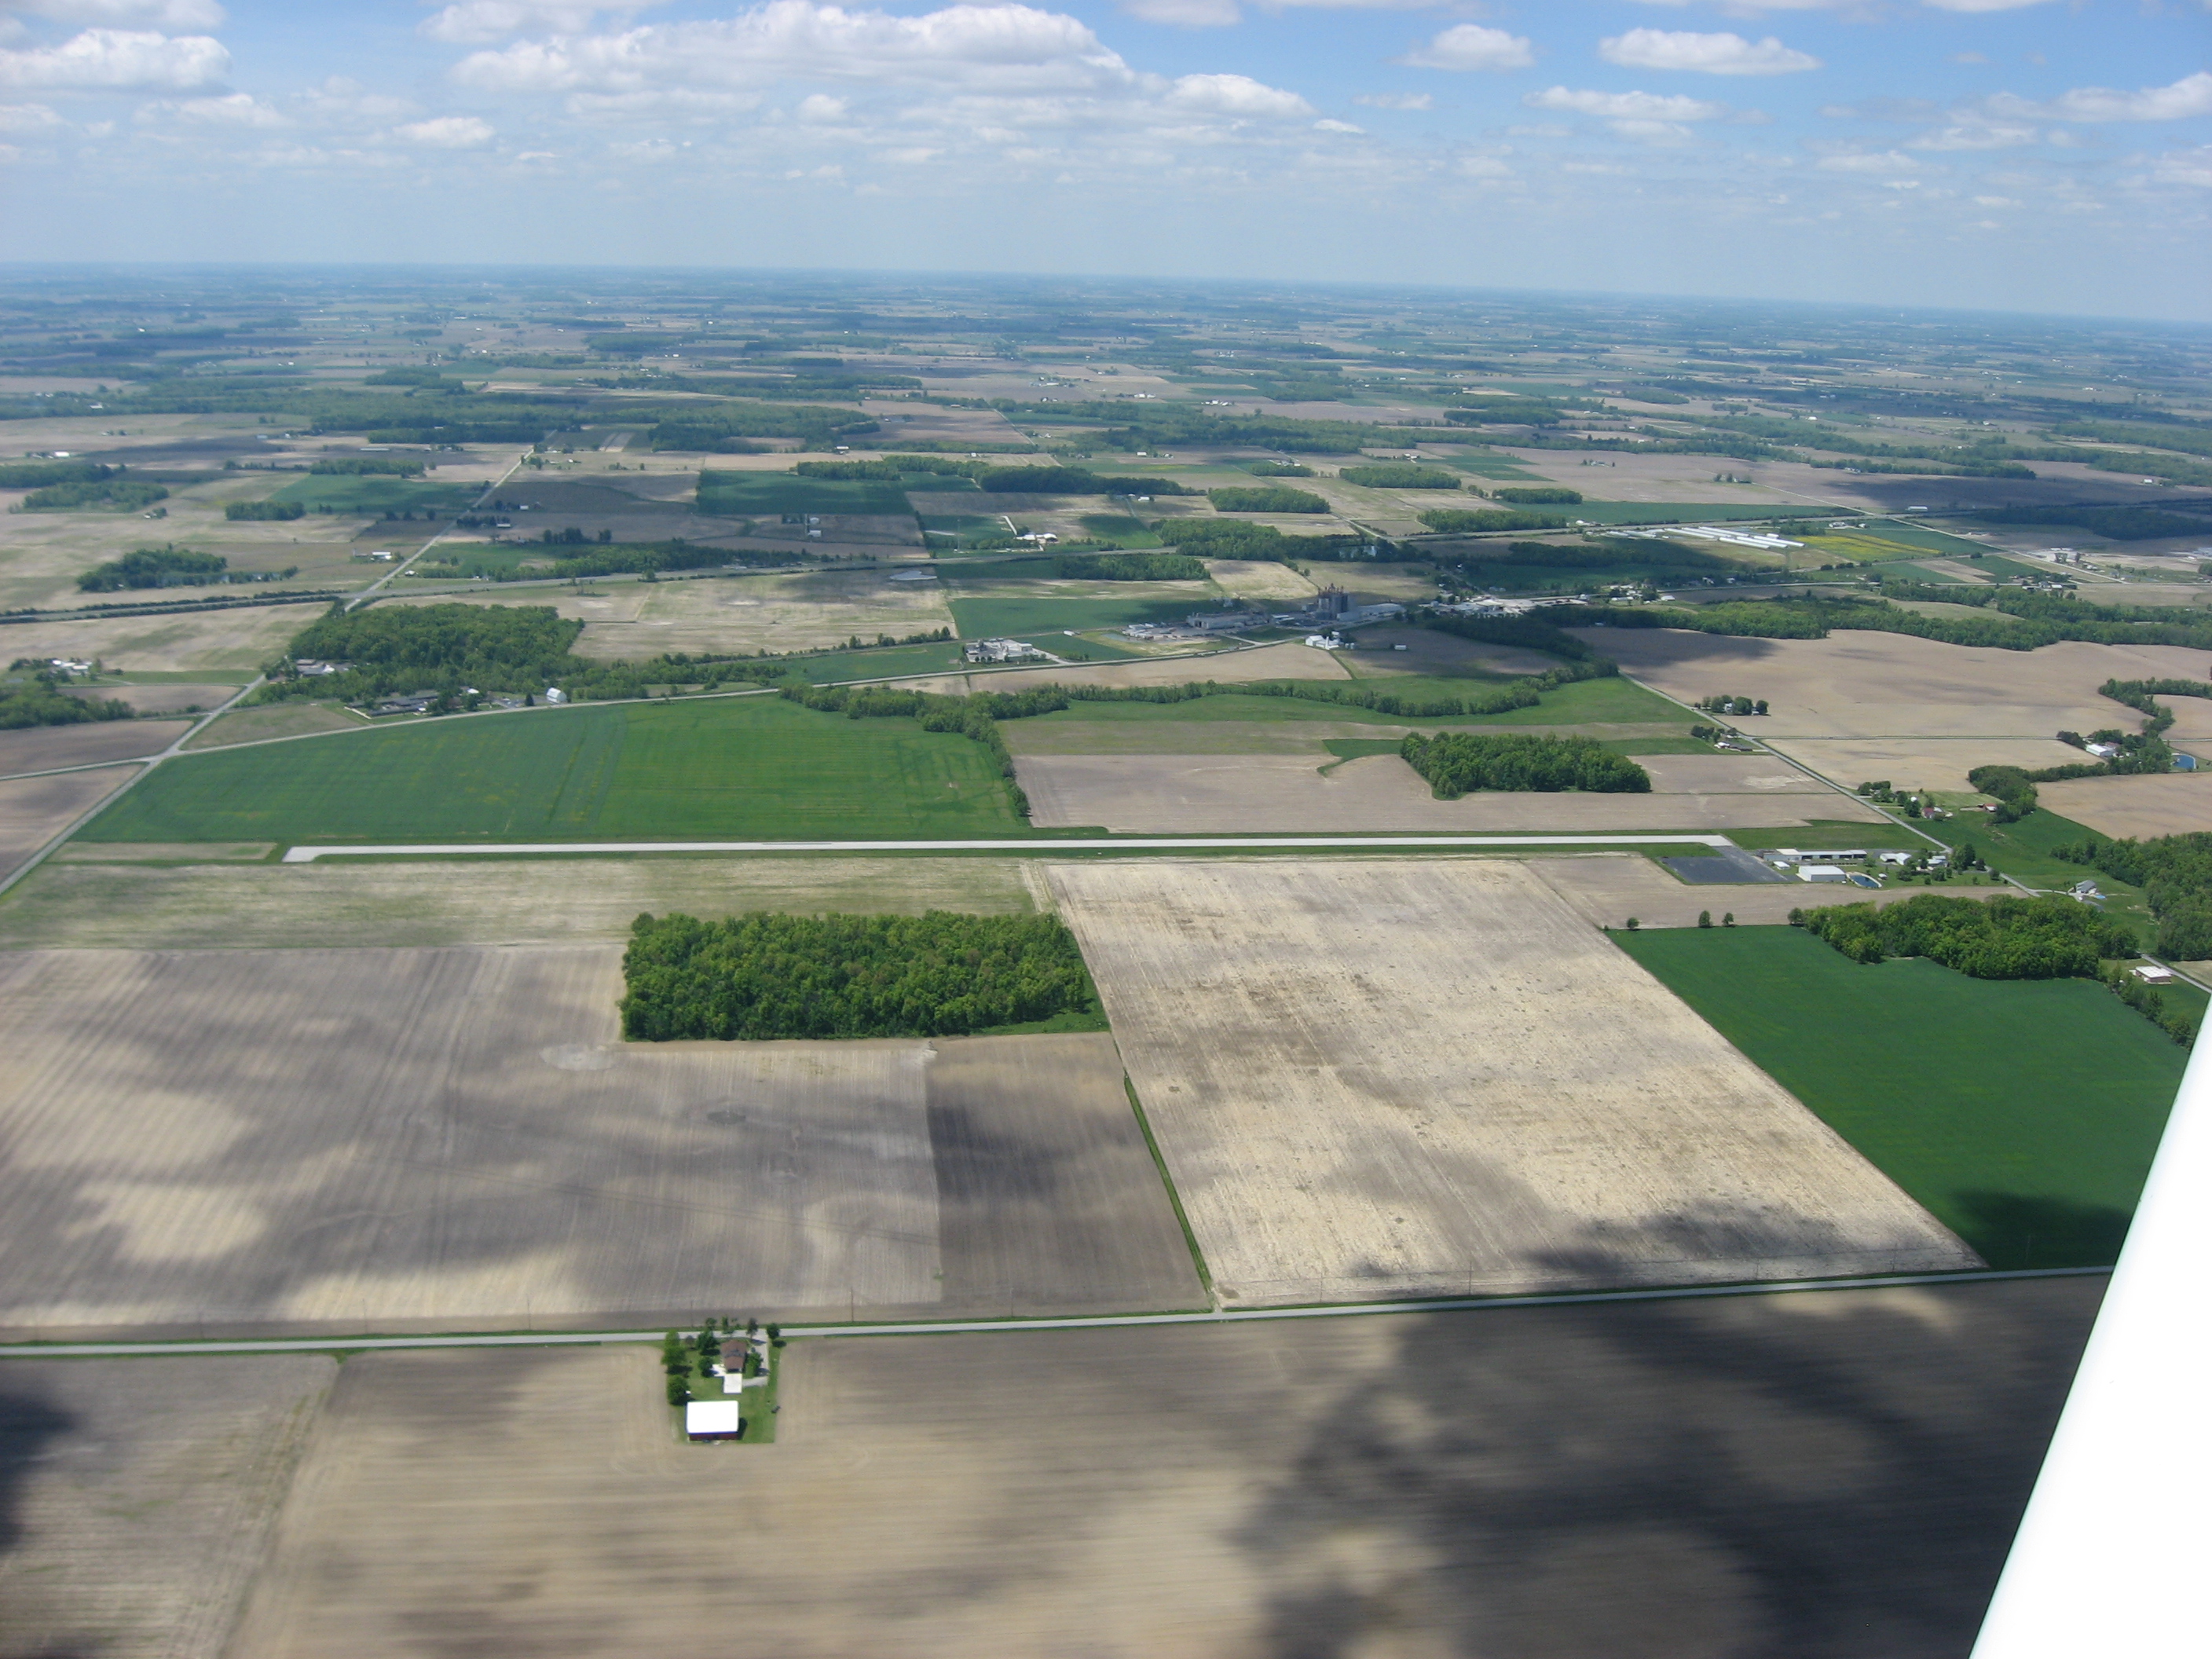 Wyandot Airport from the east